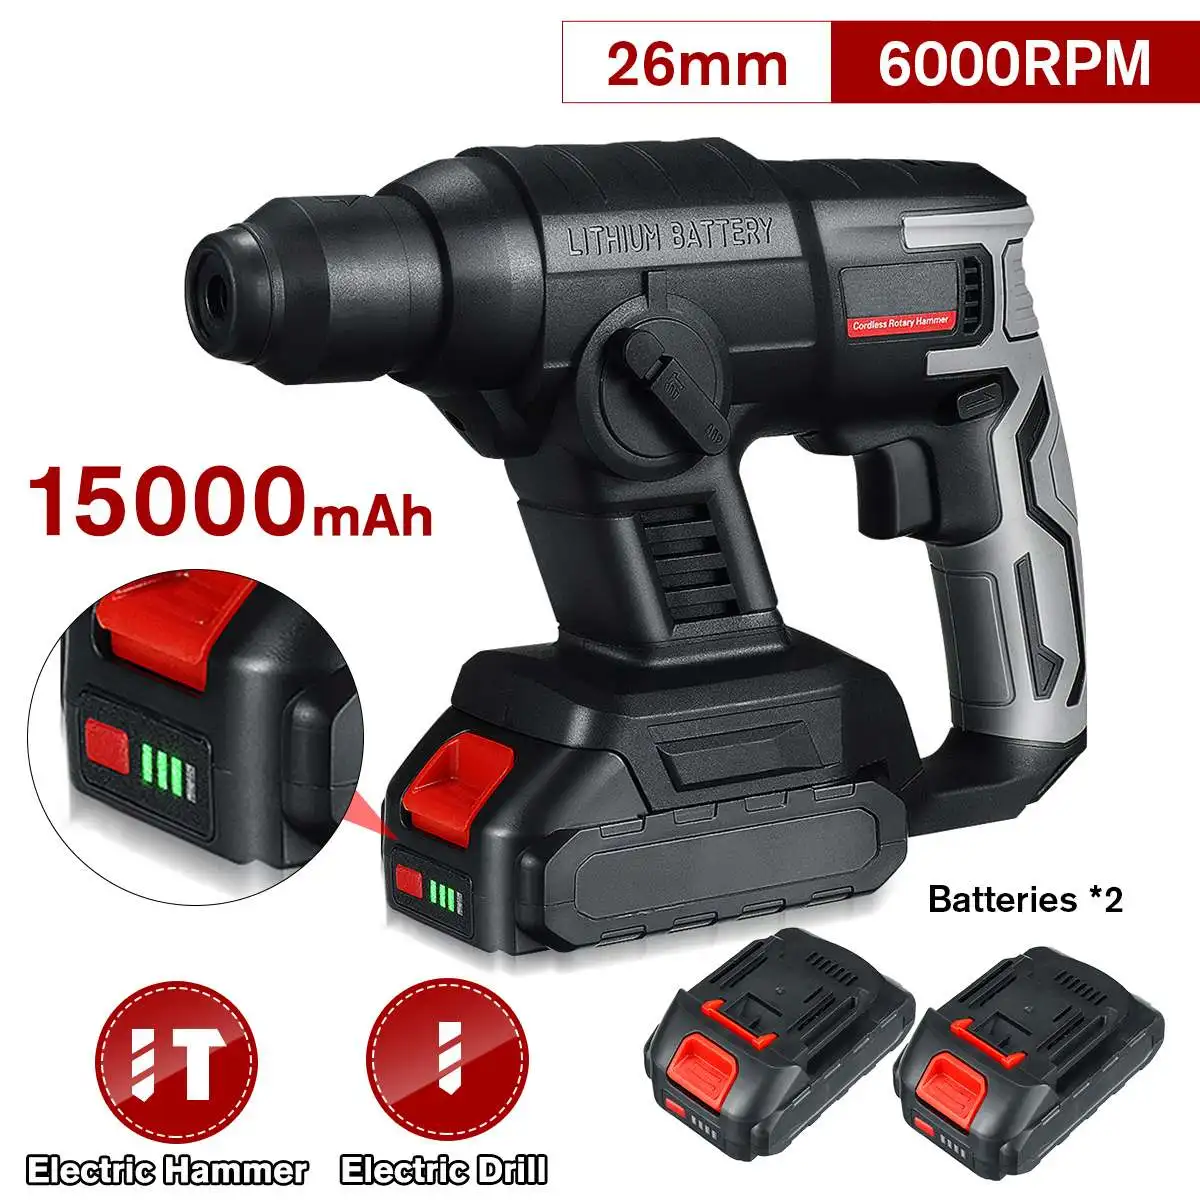 6000RPM 15000mAh 26mm Electric Rotary Hammer Rechargeable Cordless Multifunction Hammer Impact Drill for Makita 18V Battery